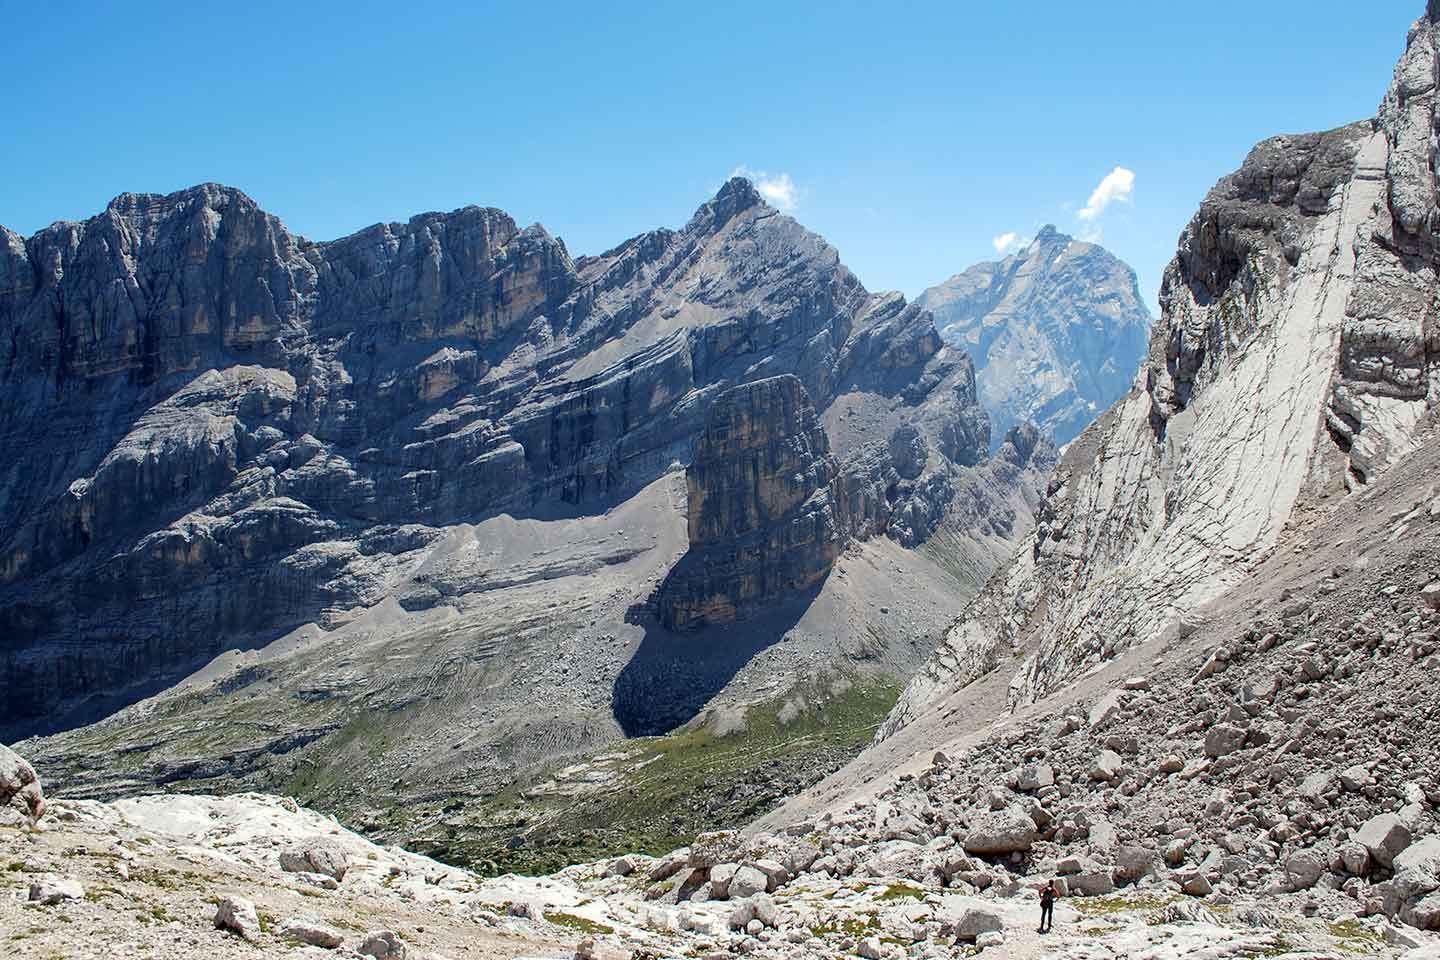 Dolomite High Route no. 4 - Torre dei Sabbioni and Mount Antelao